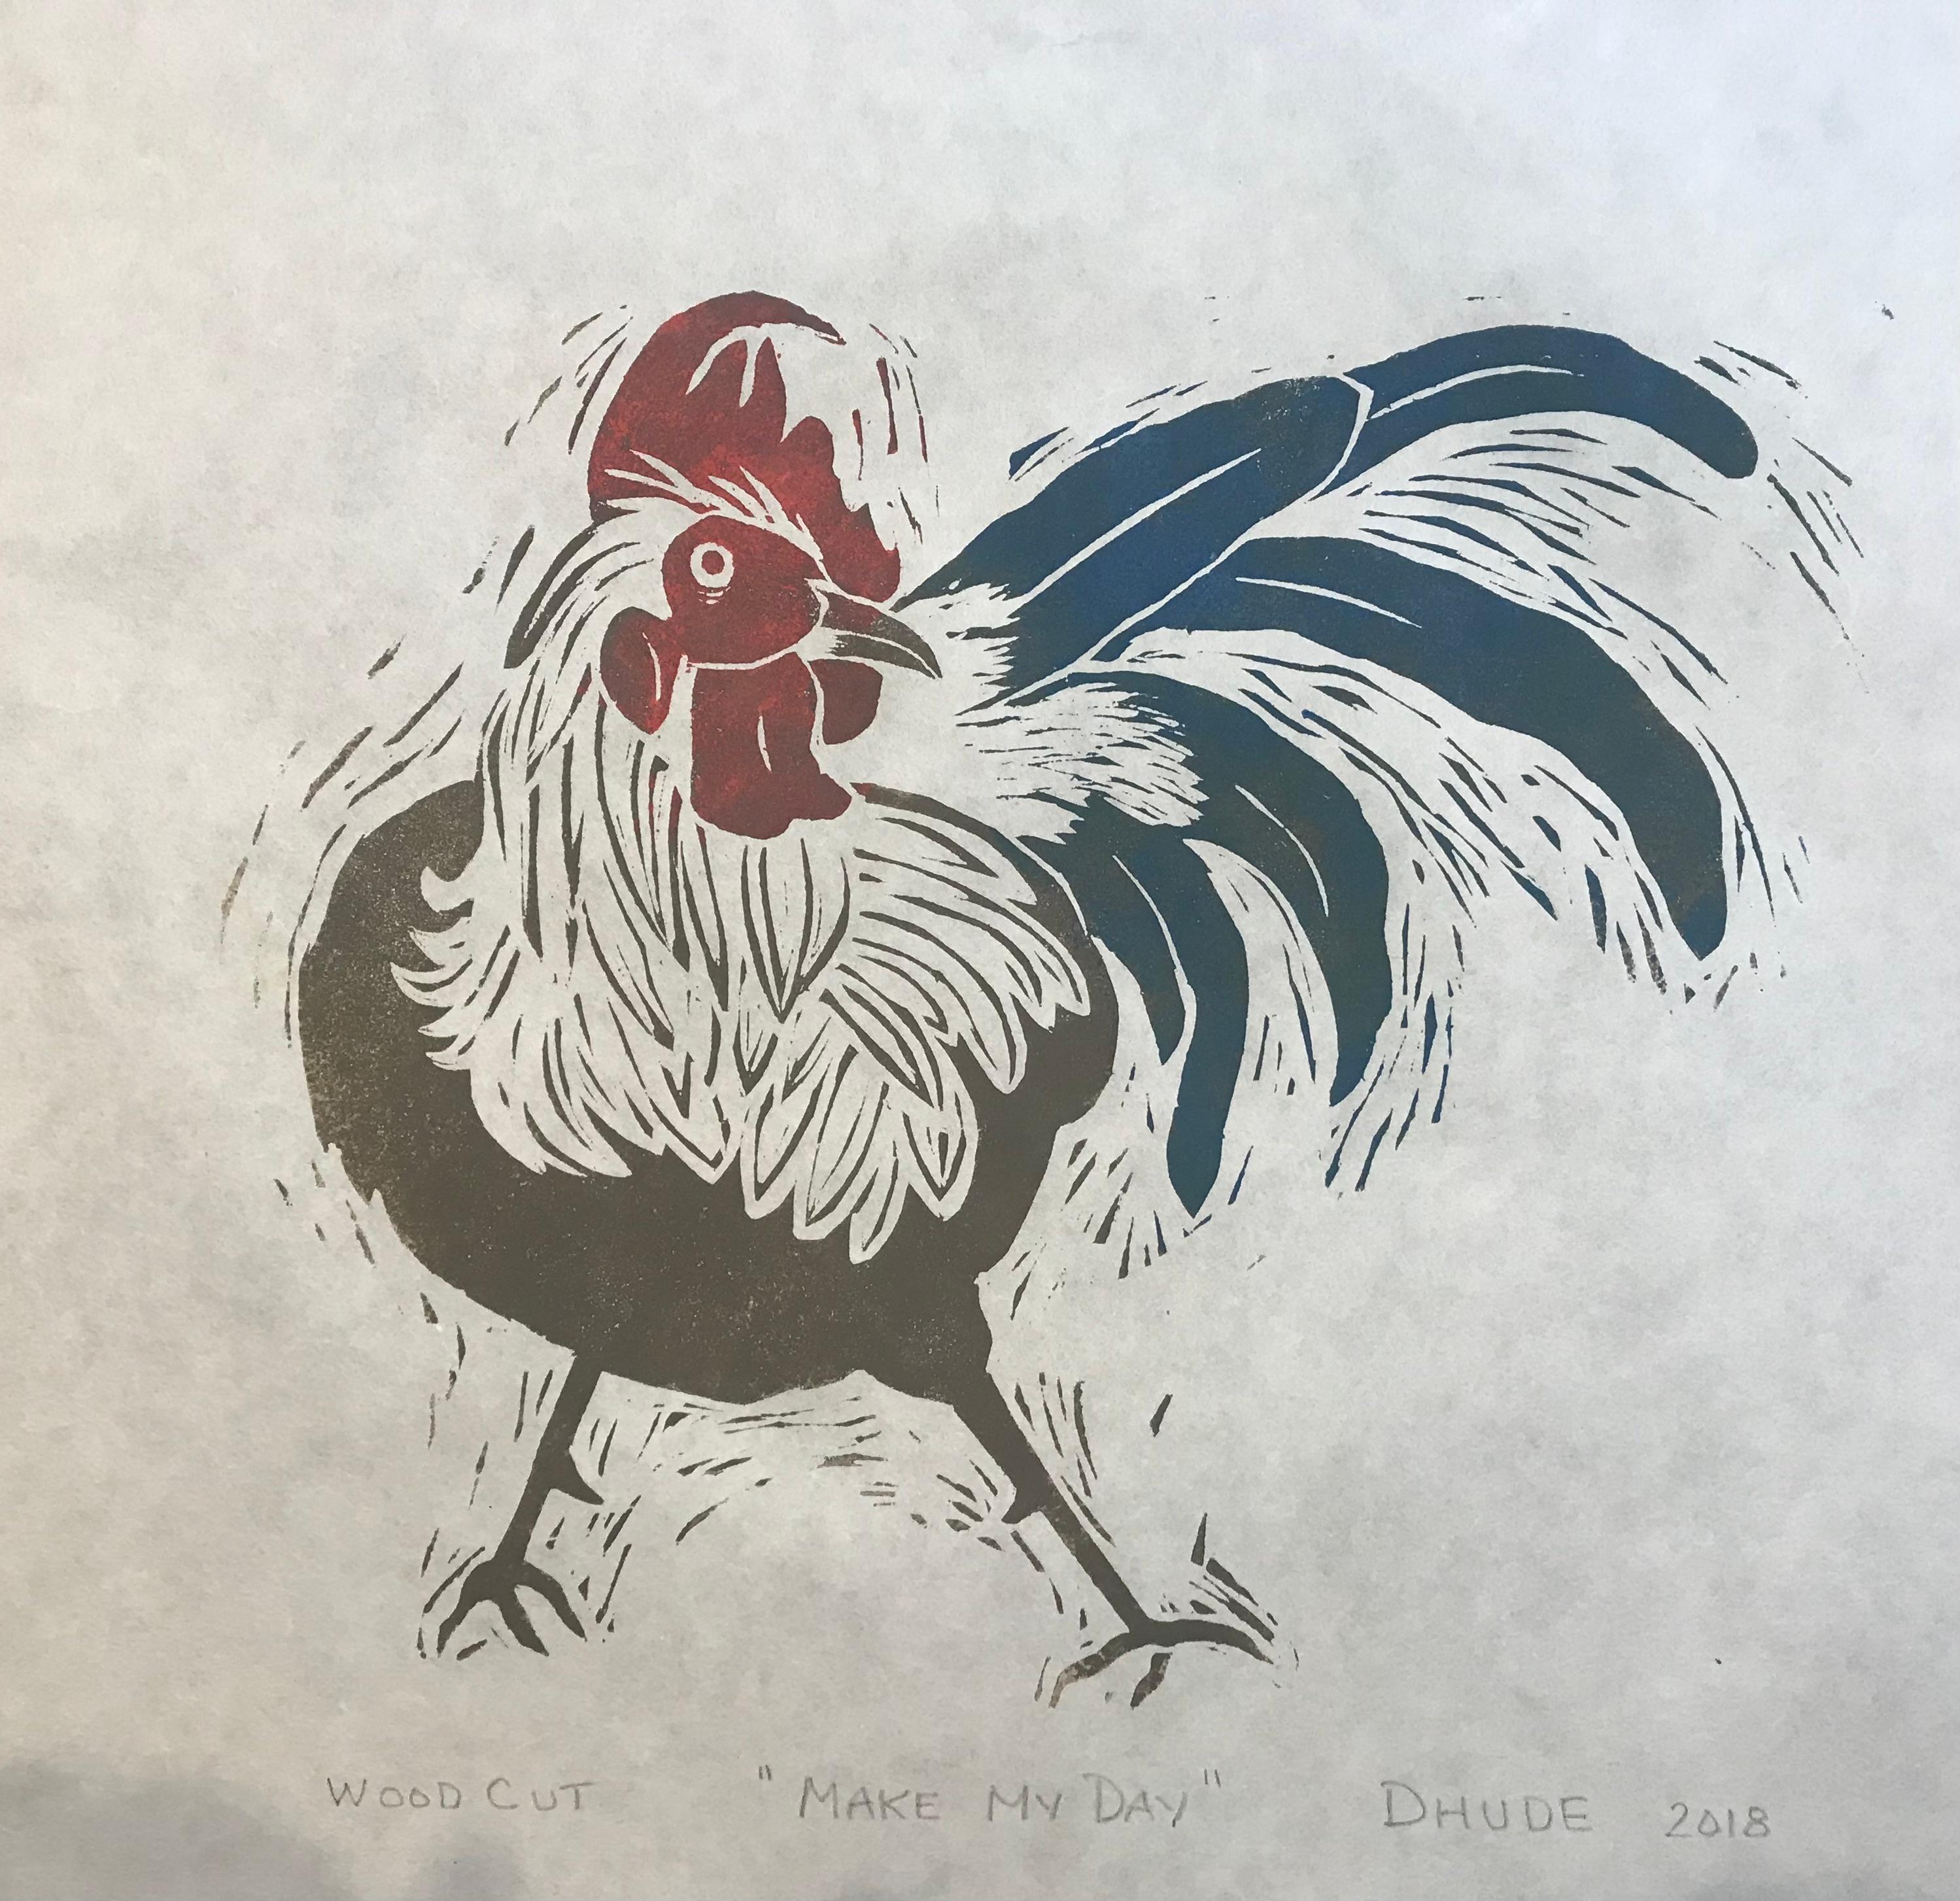 Heres a rooster with attitude! He's checkin you out! Be carefull.
Printed on off white rice paper.

Make My Day - Animal Painting - Woodcut Print By Marc Zimmerman

Limited Edition 01/16

This masterpiece is exhibited in the Zimmerman Gallery,